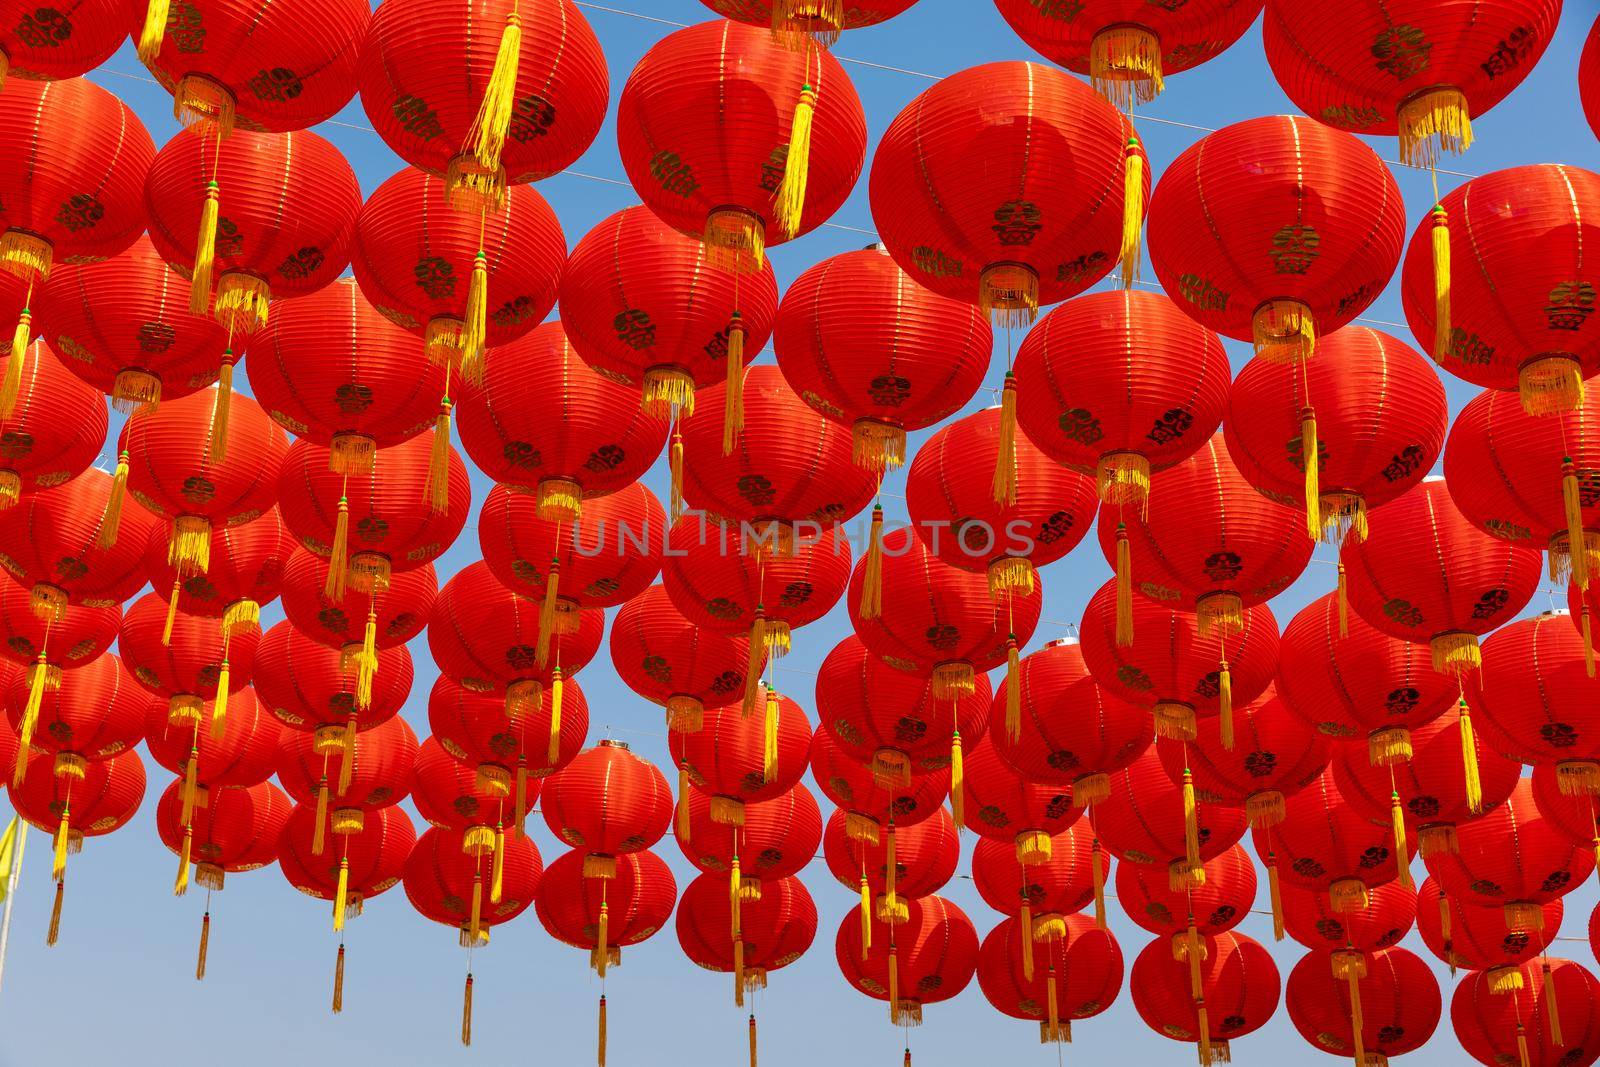 Chinese new year lanterns in china town area.